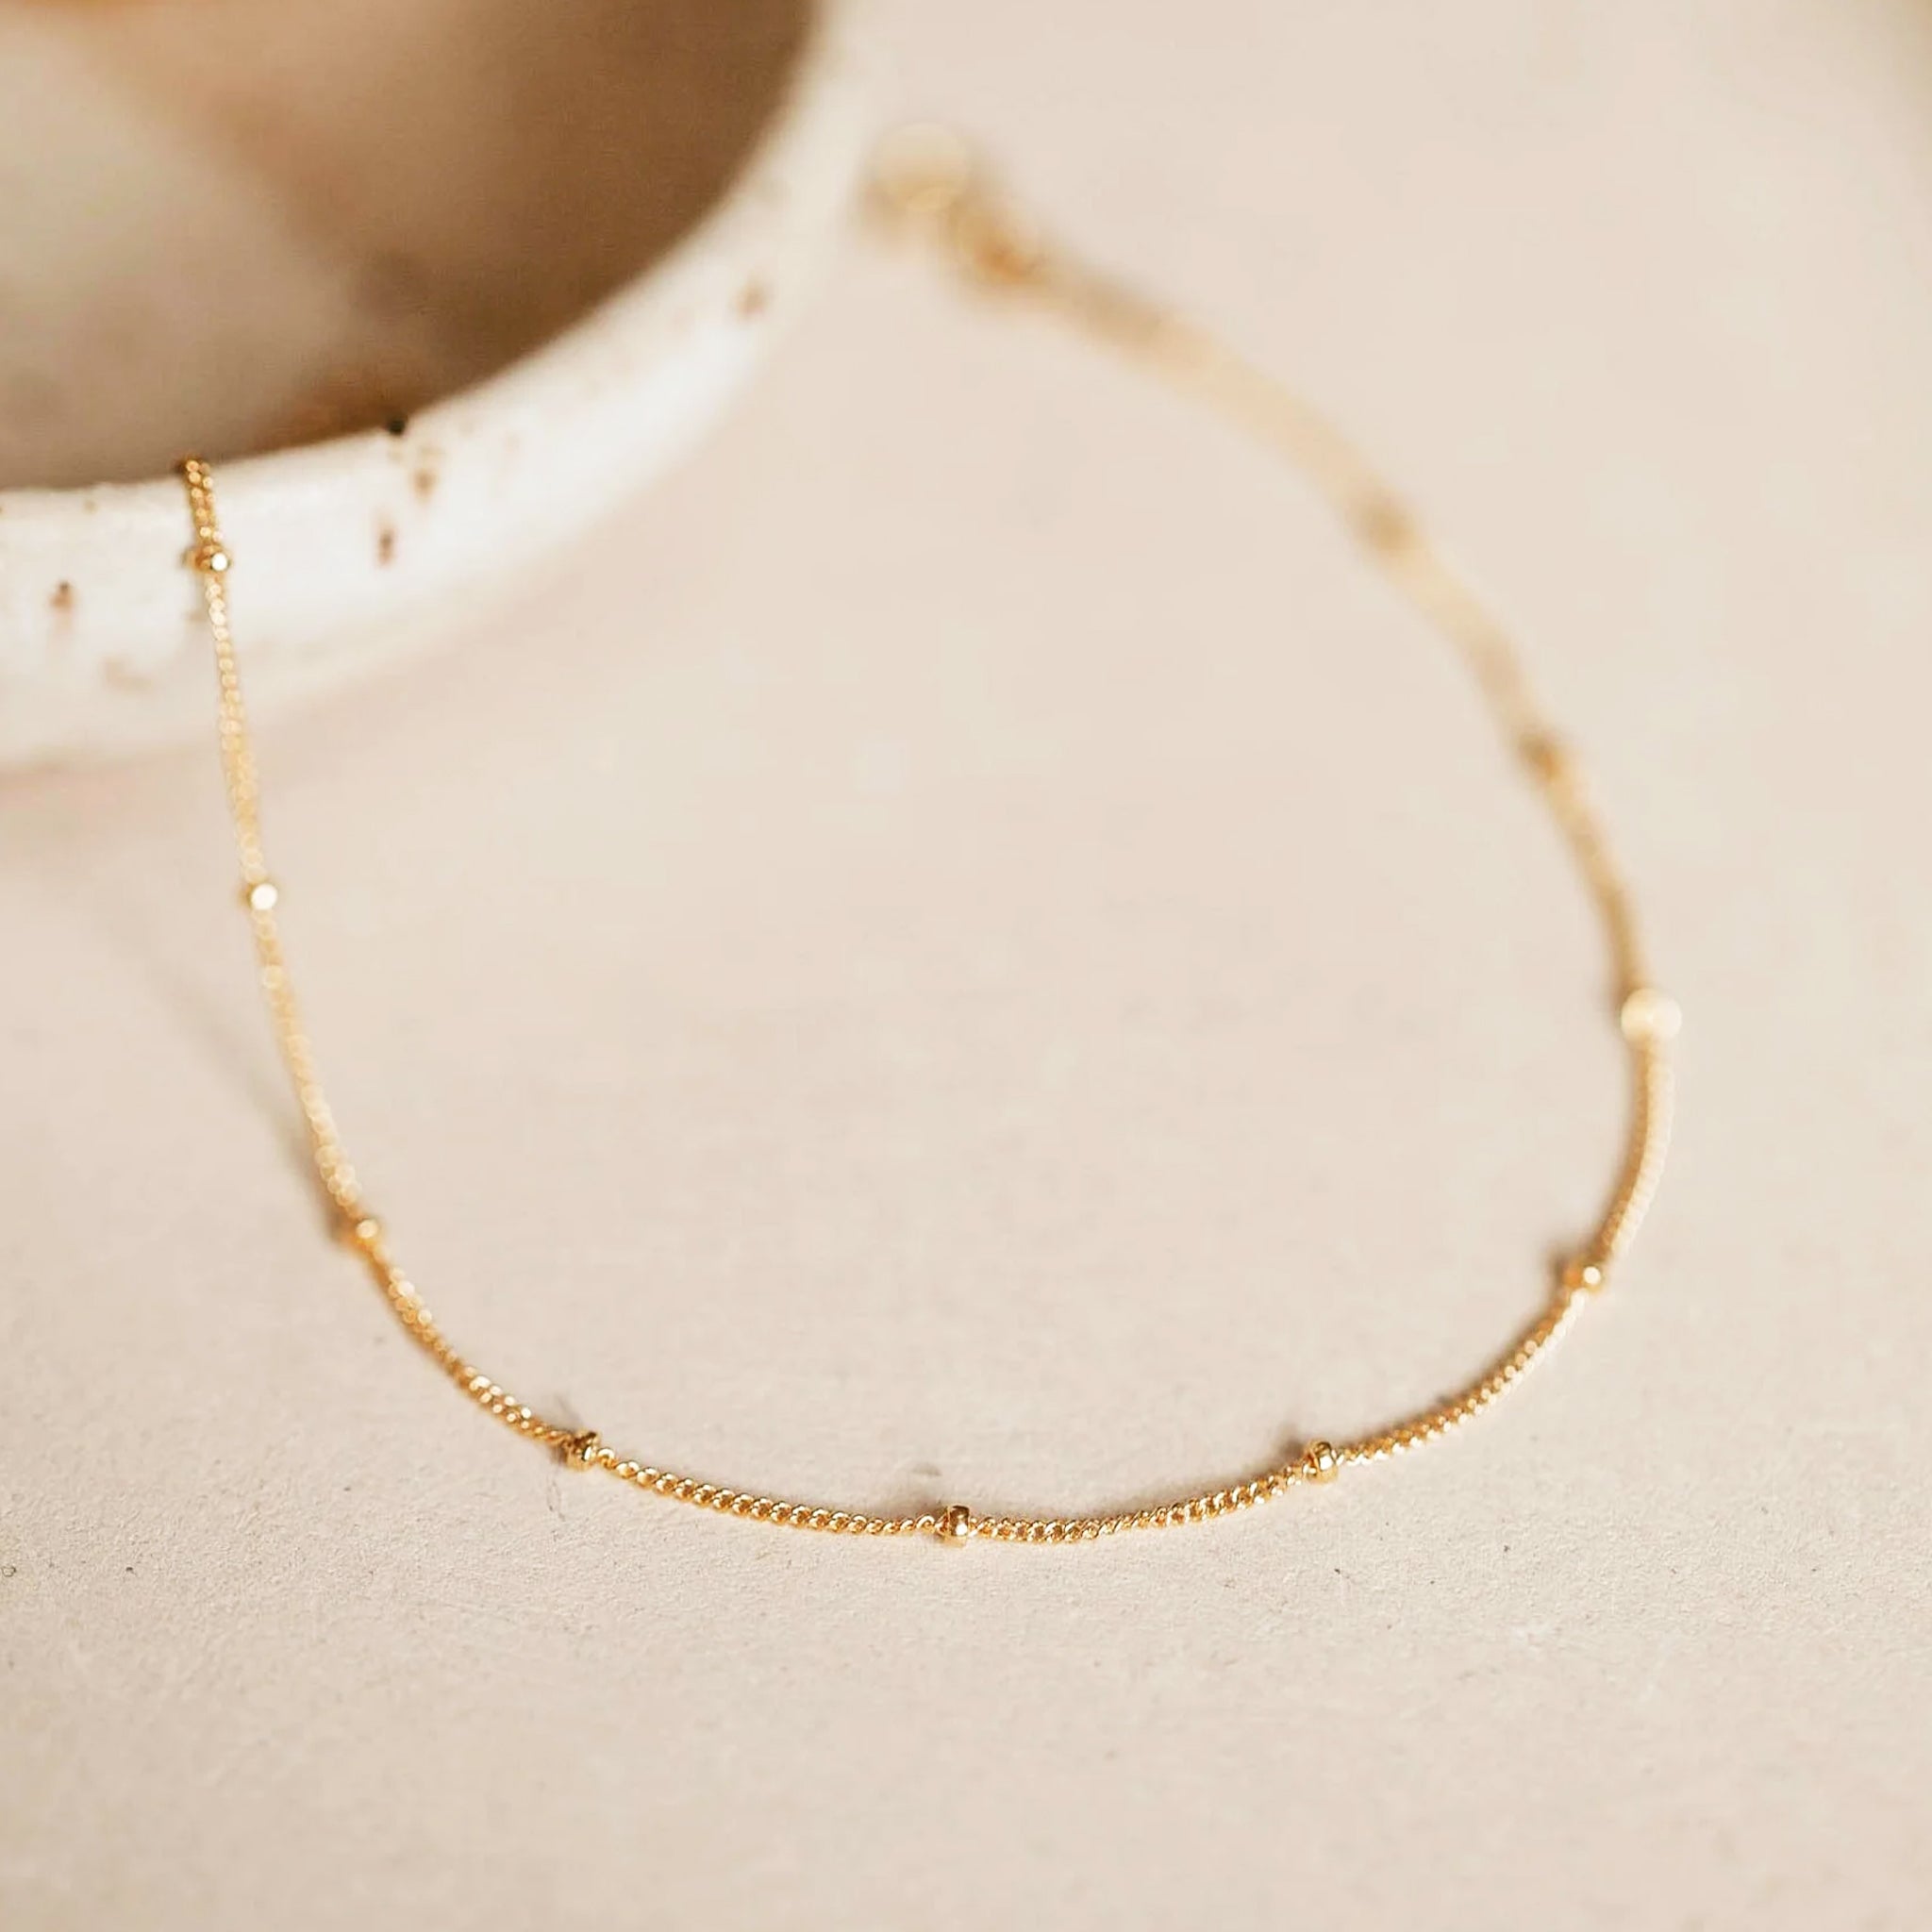 A gold chain anklet with small balls spaced out on the chain. 